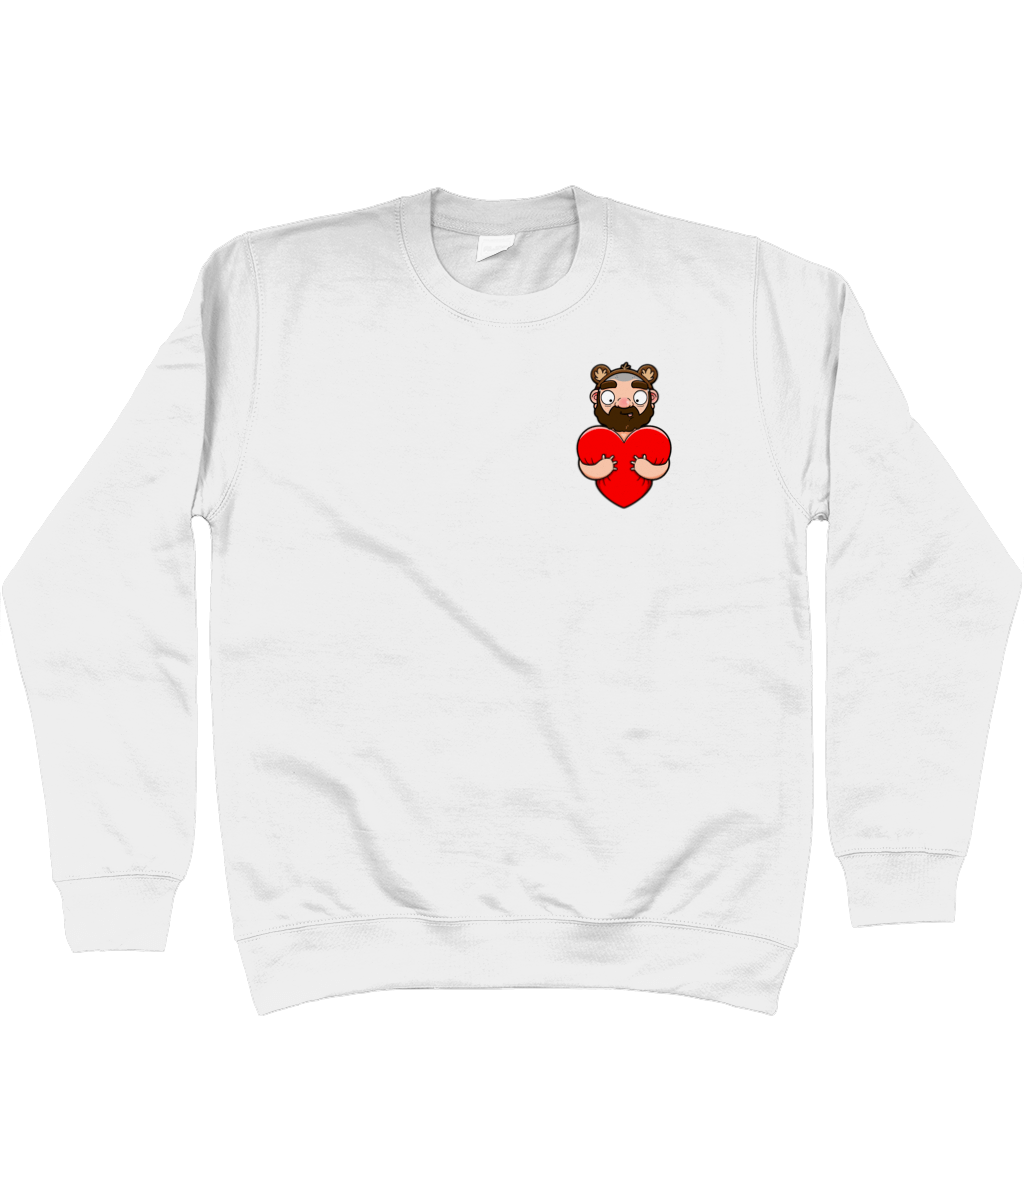 Fun design showcasing a furry bearded gay wearing bear ears embracing a vibrant red heart and giving it a hug.